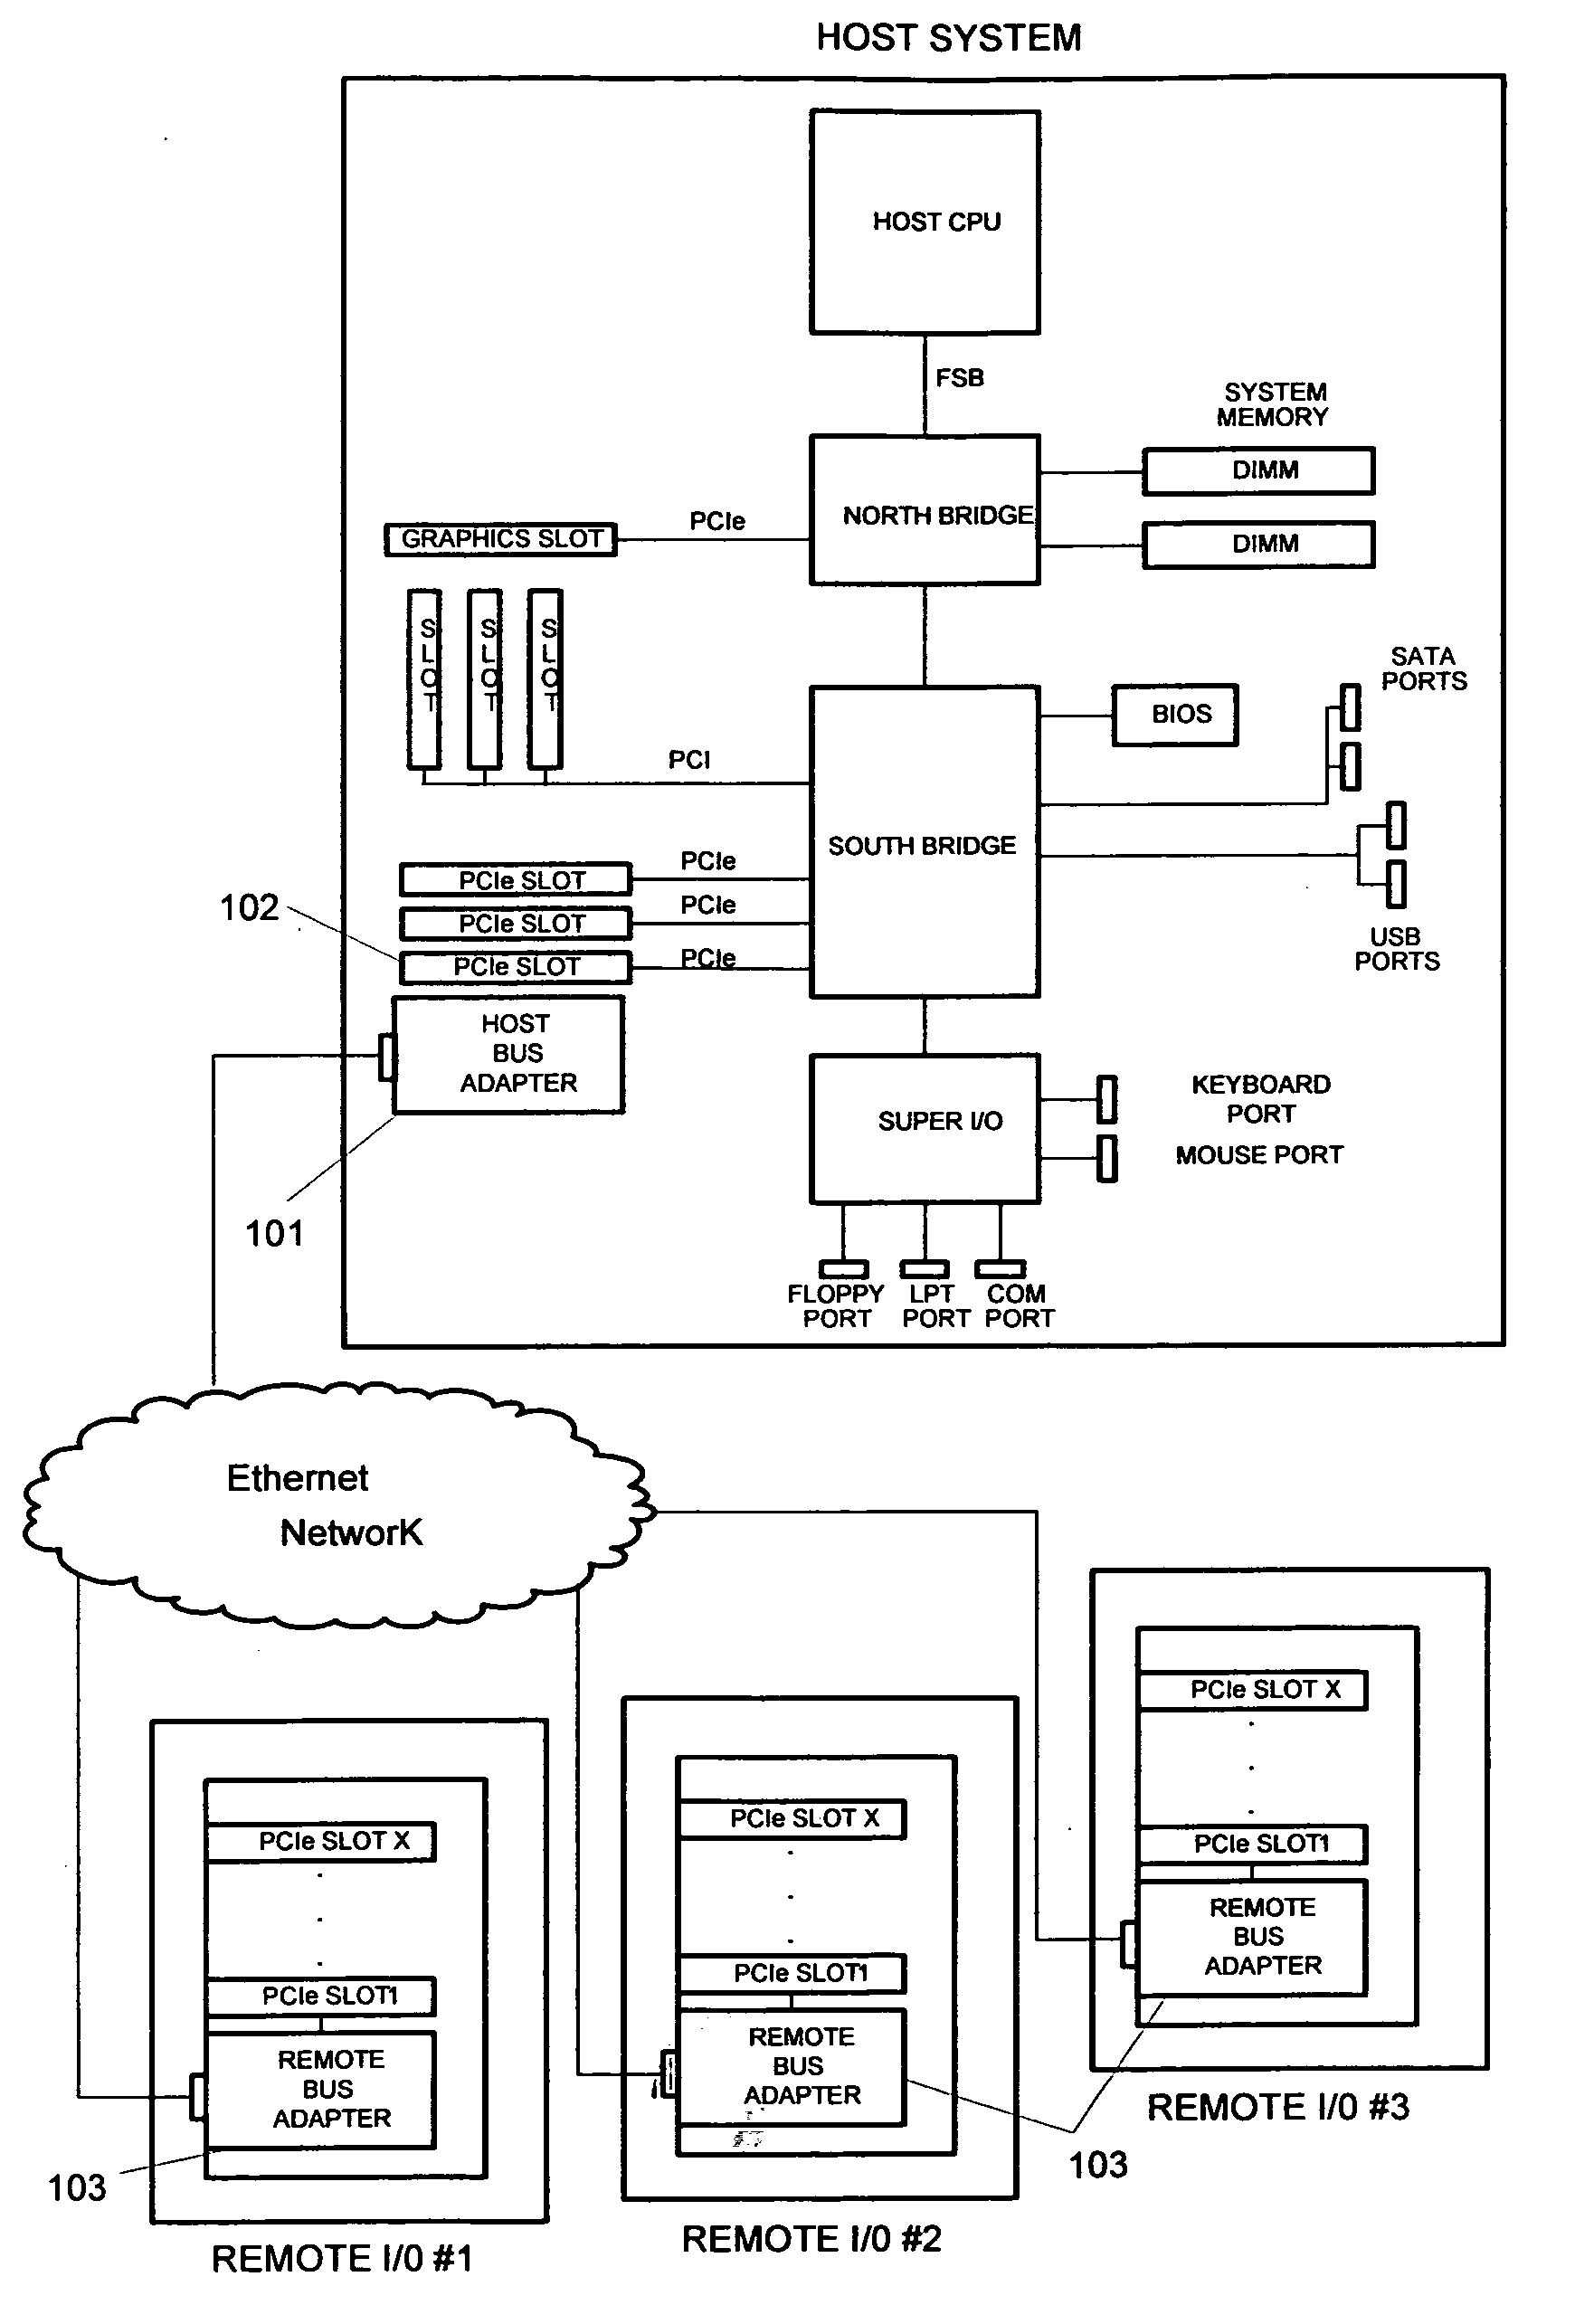 Host bus adapter with network protocol auto-detection and selection capability